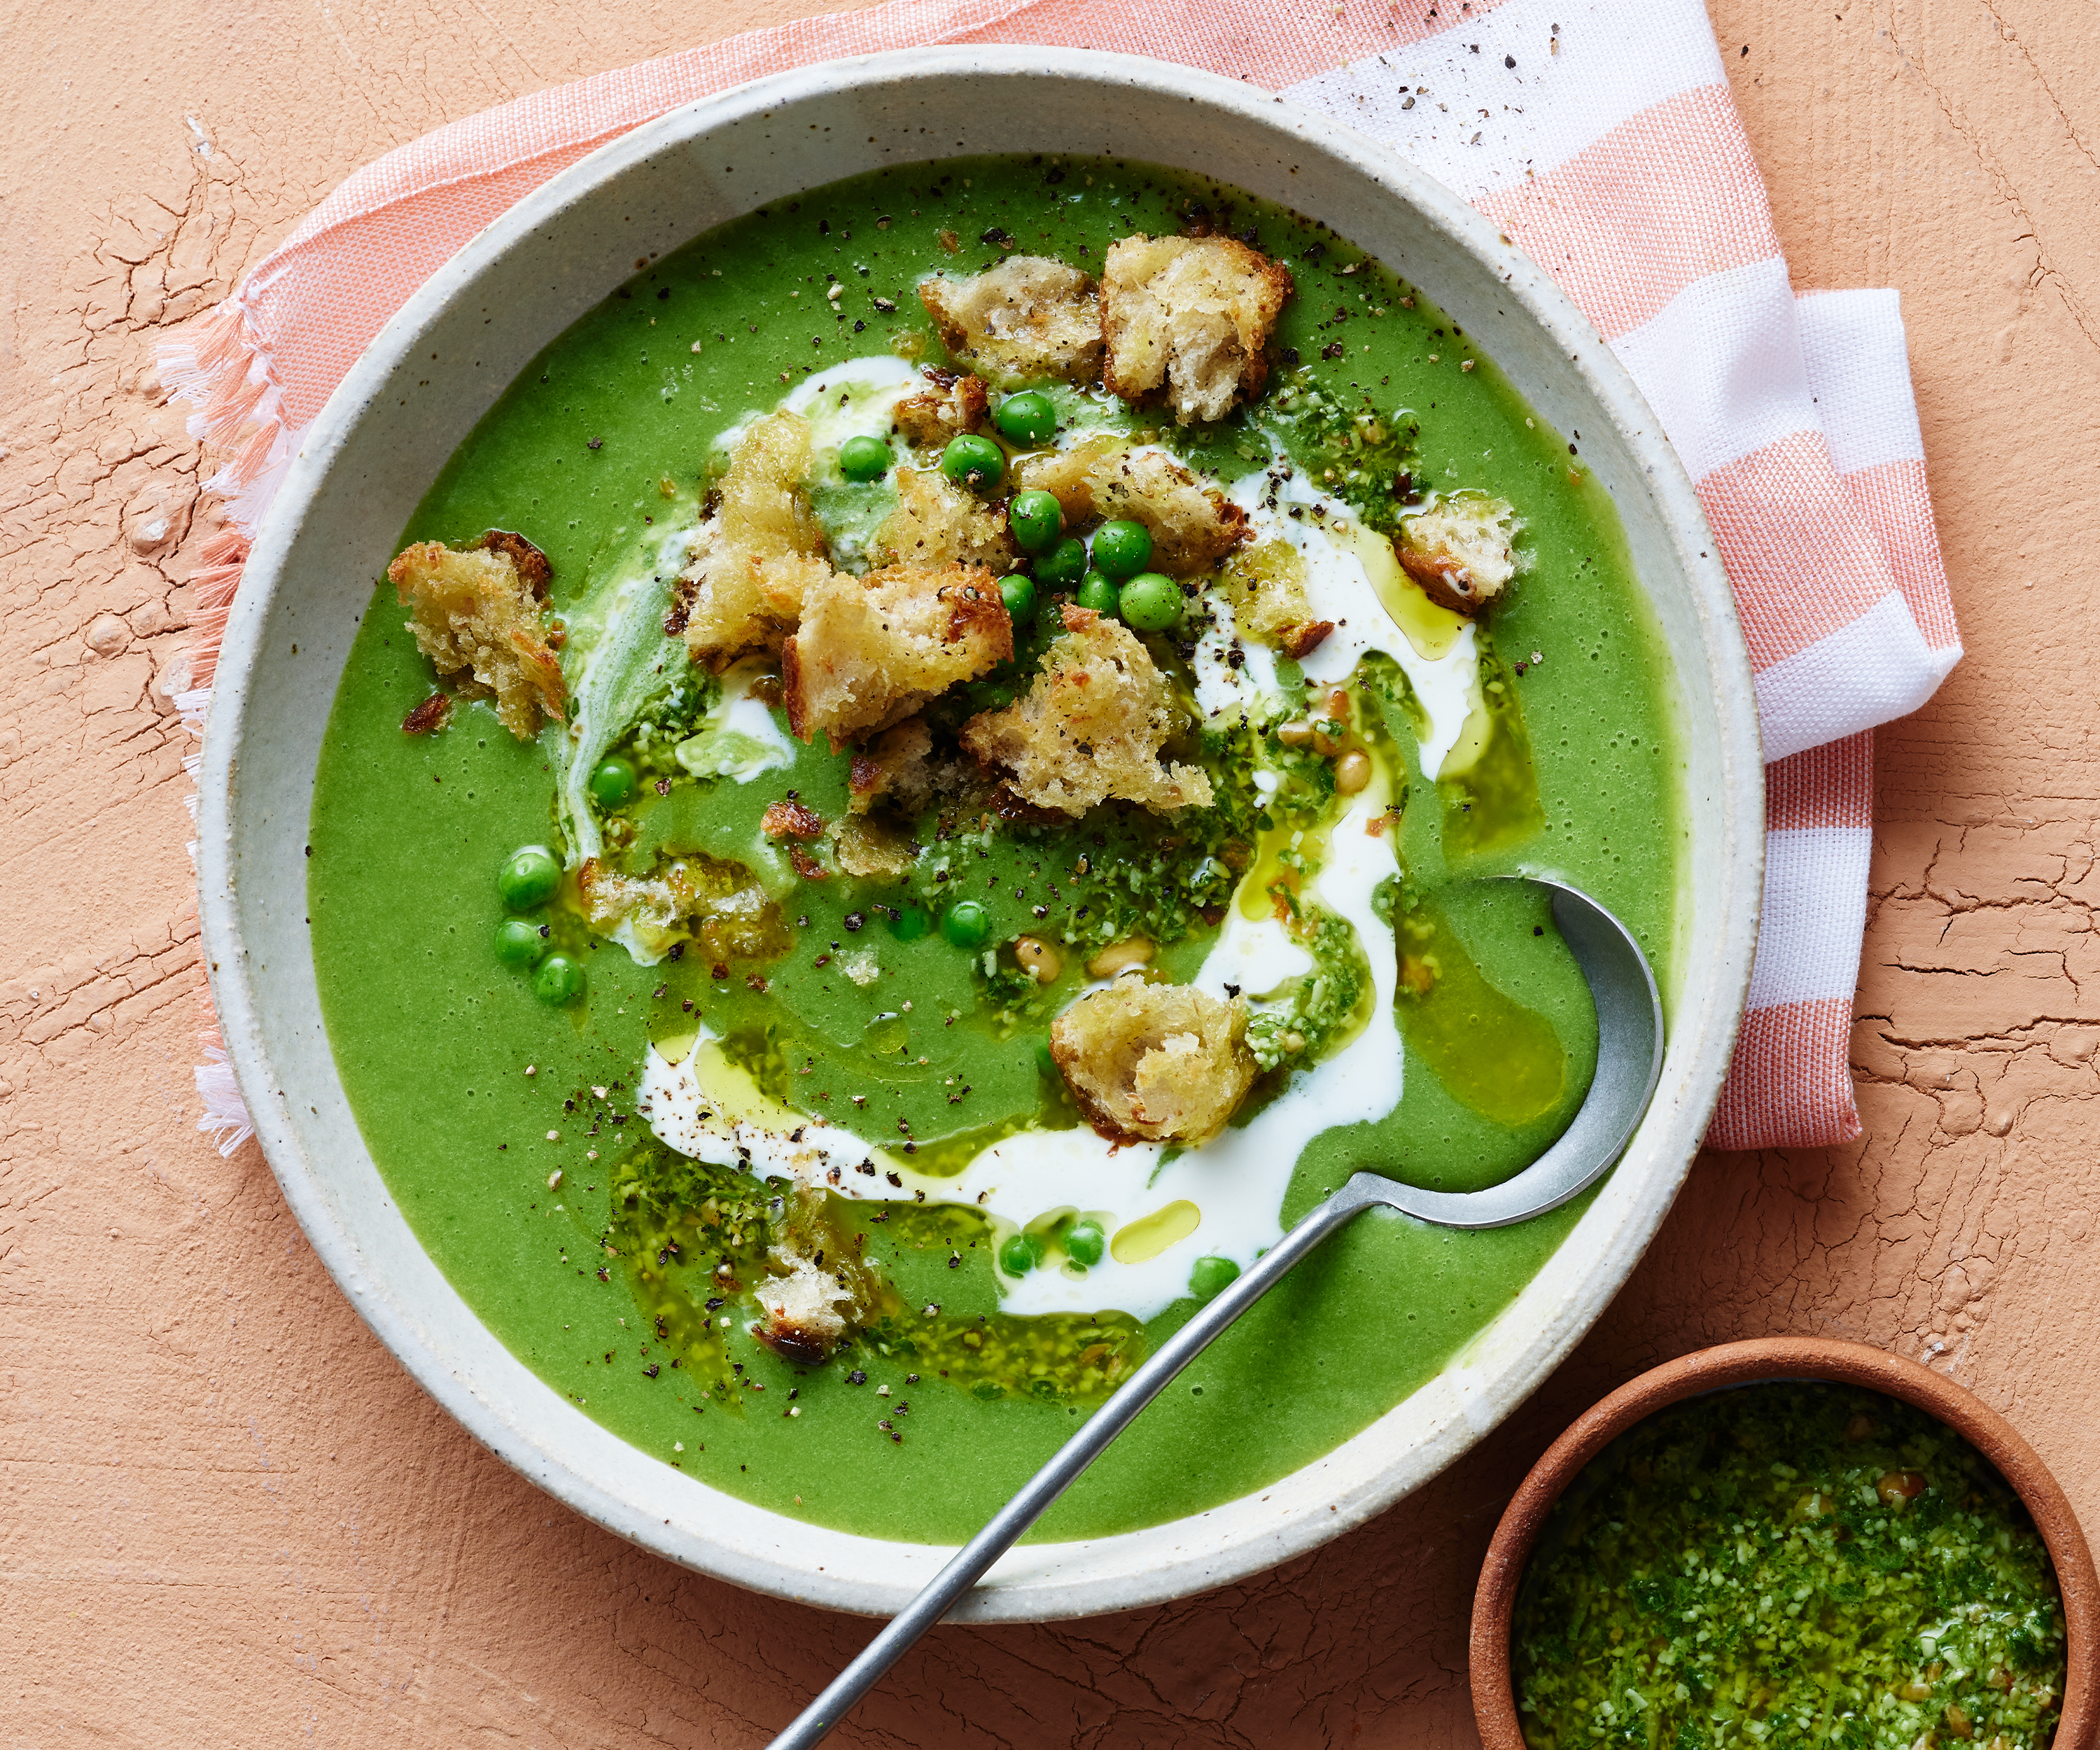 Bowl of pea and pesto soup with croutons